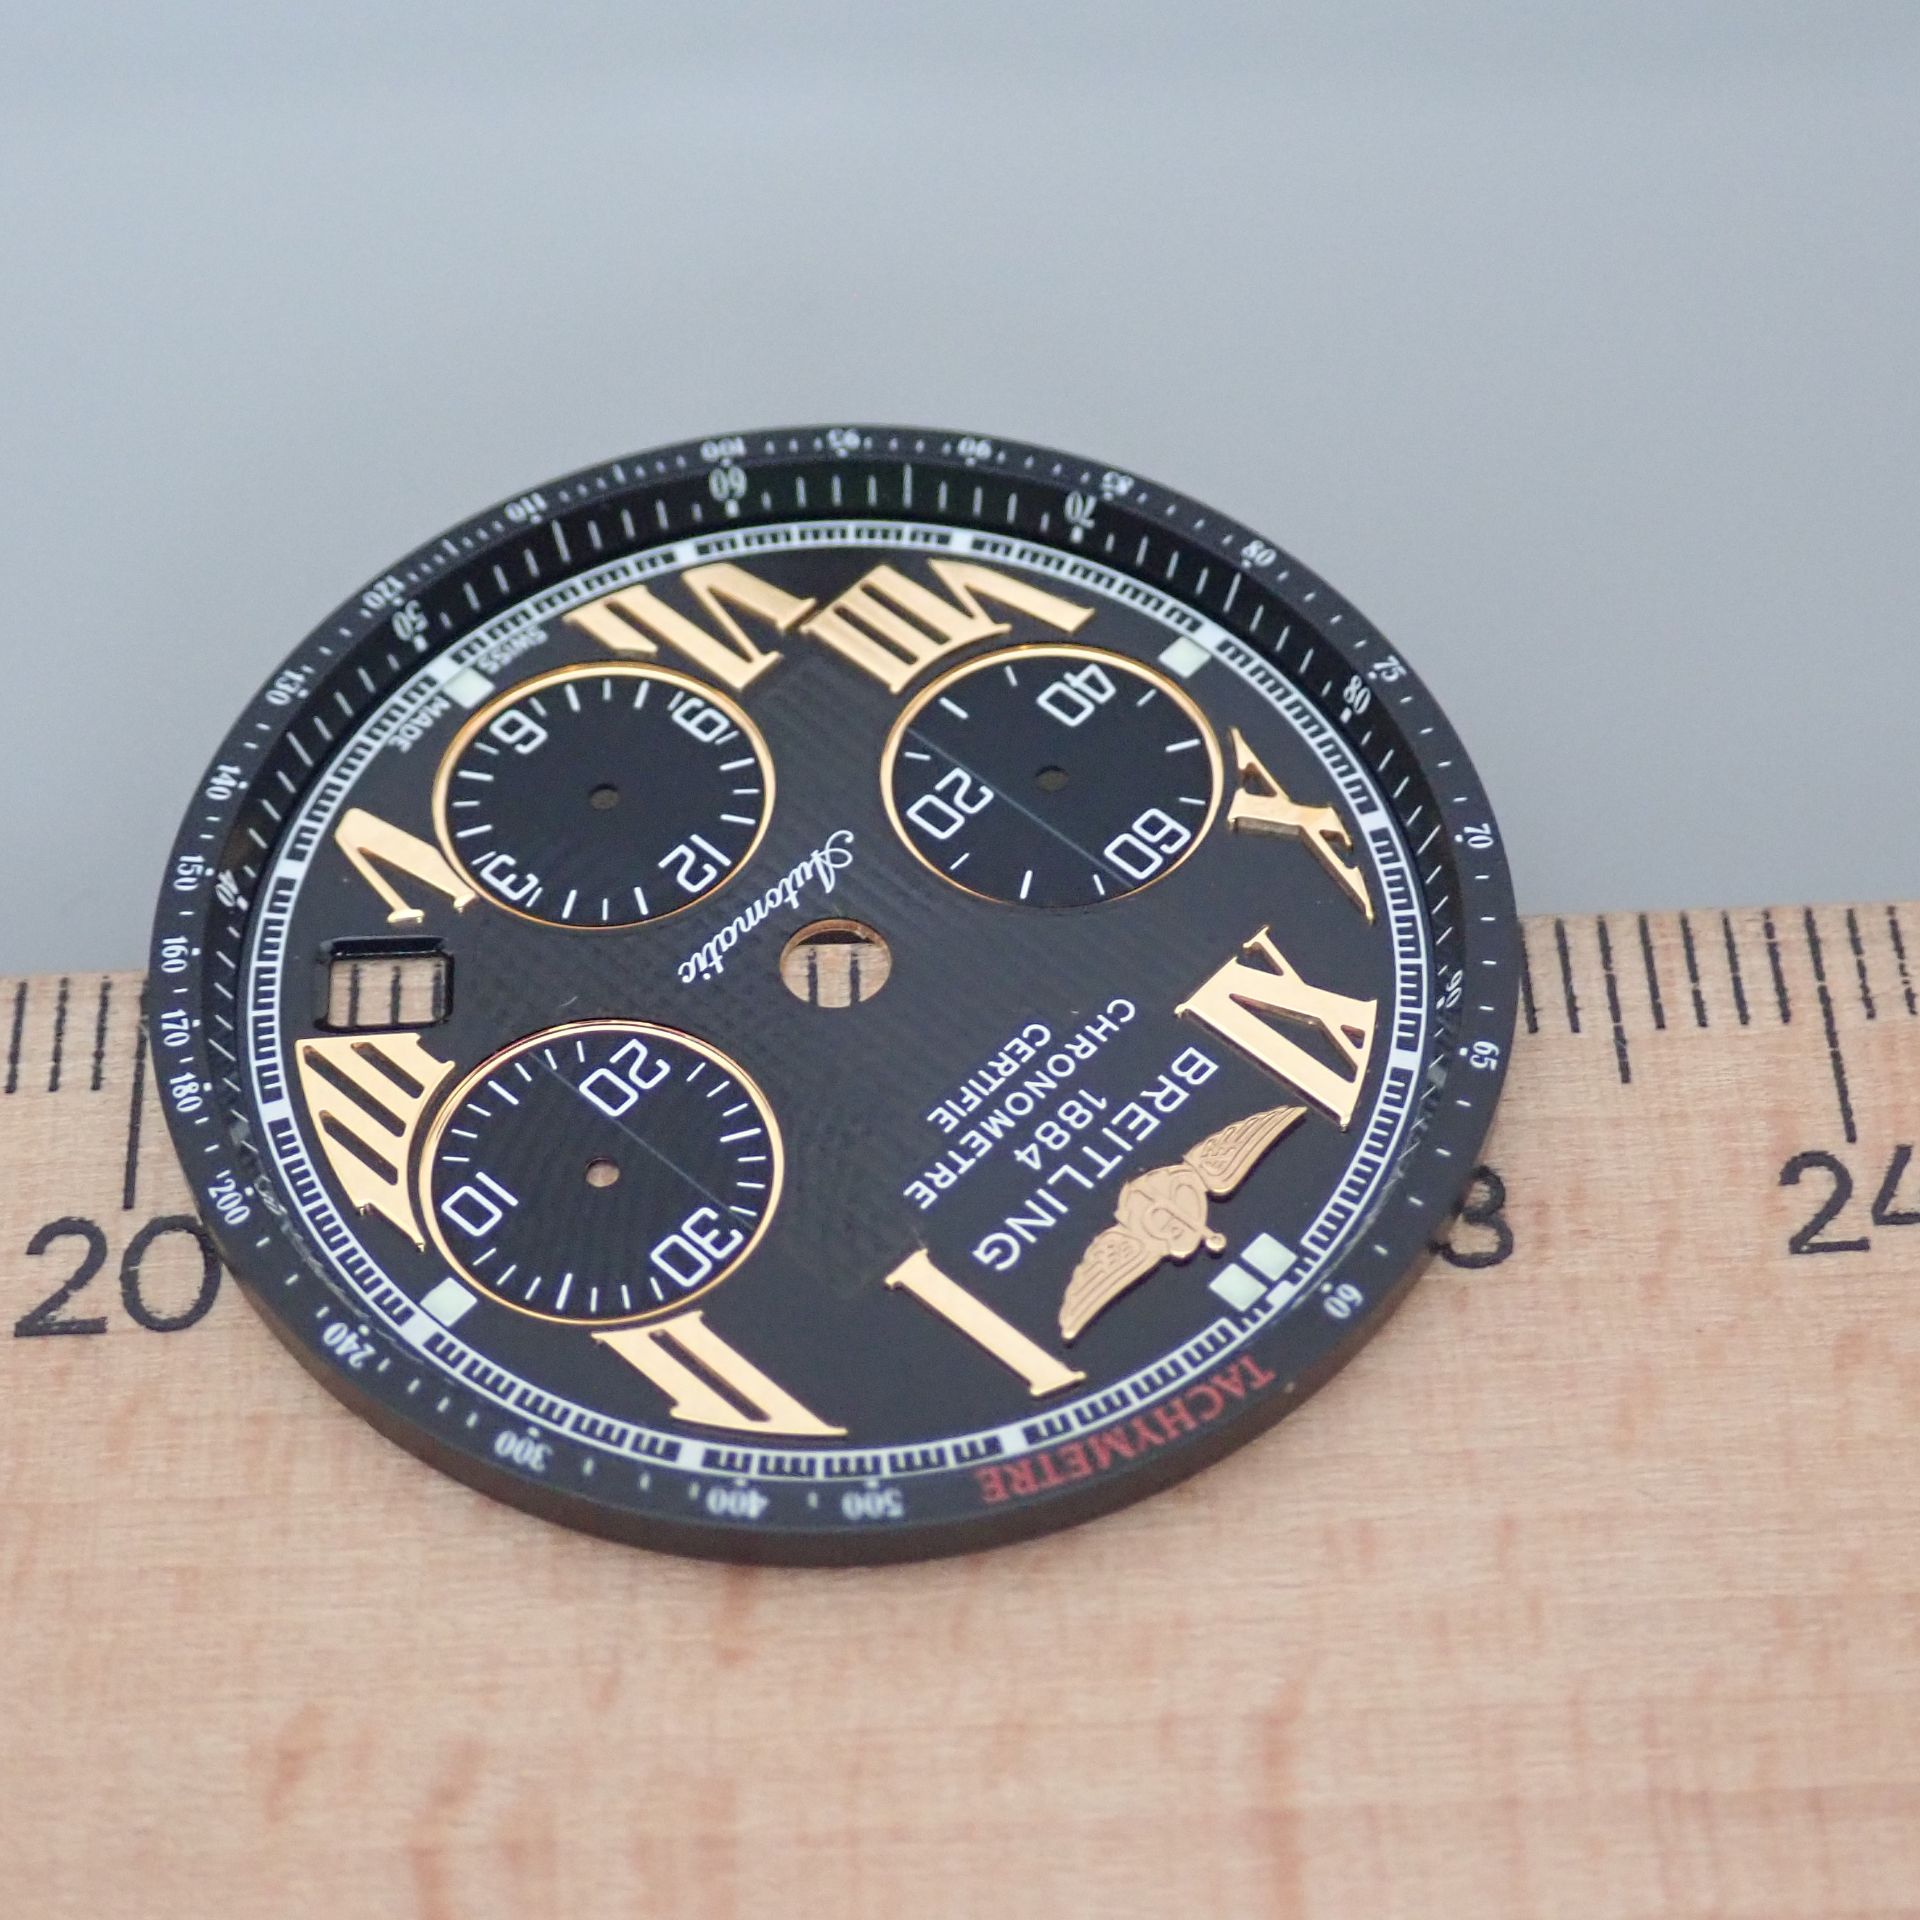 Breitling / Dial - Image 2 of 2